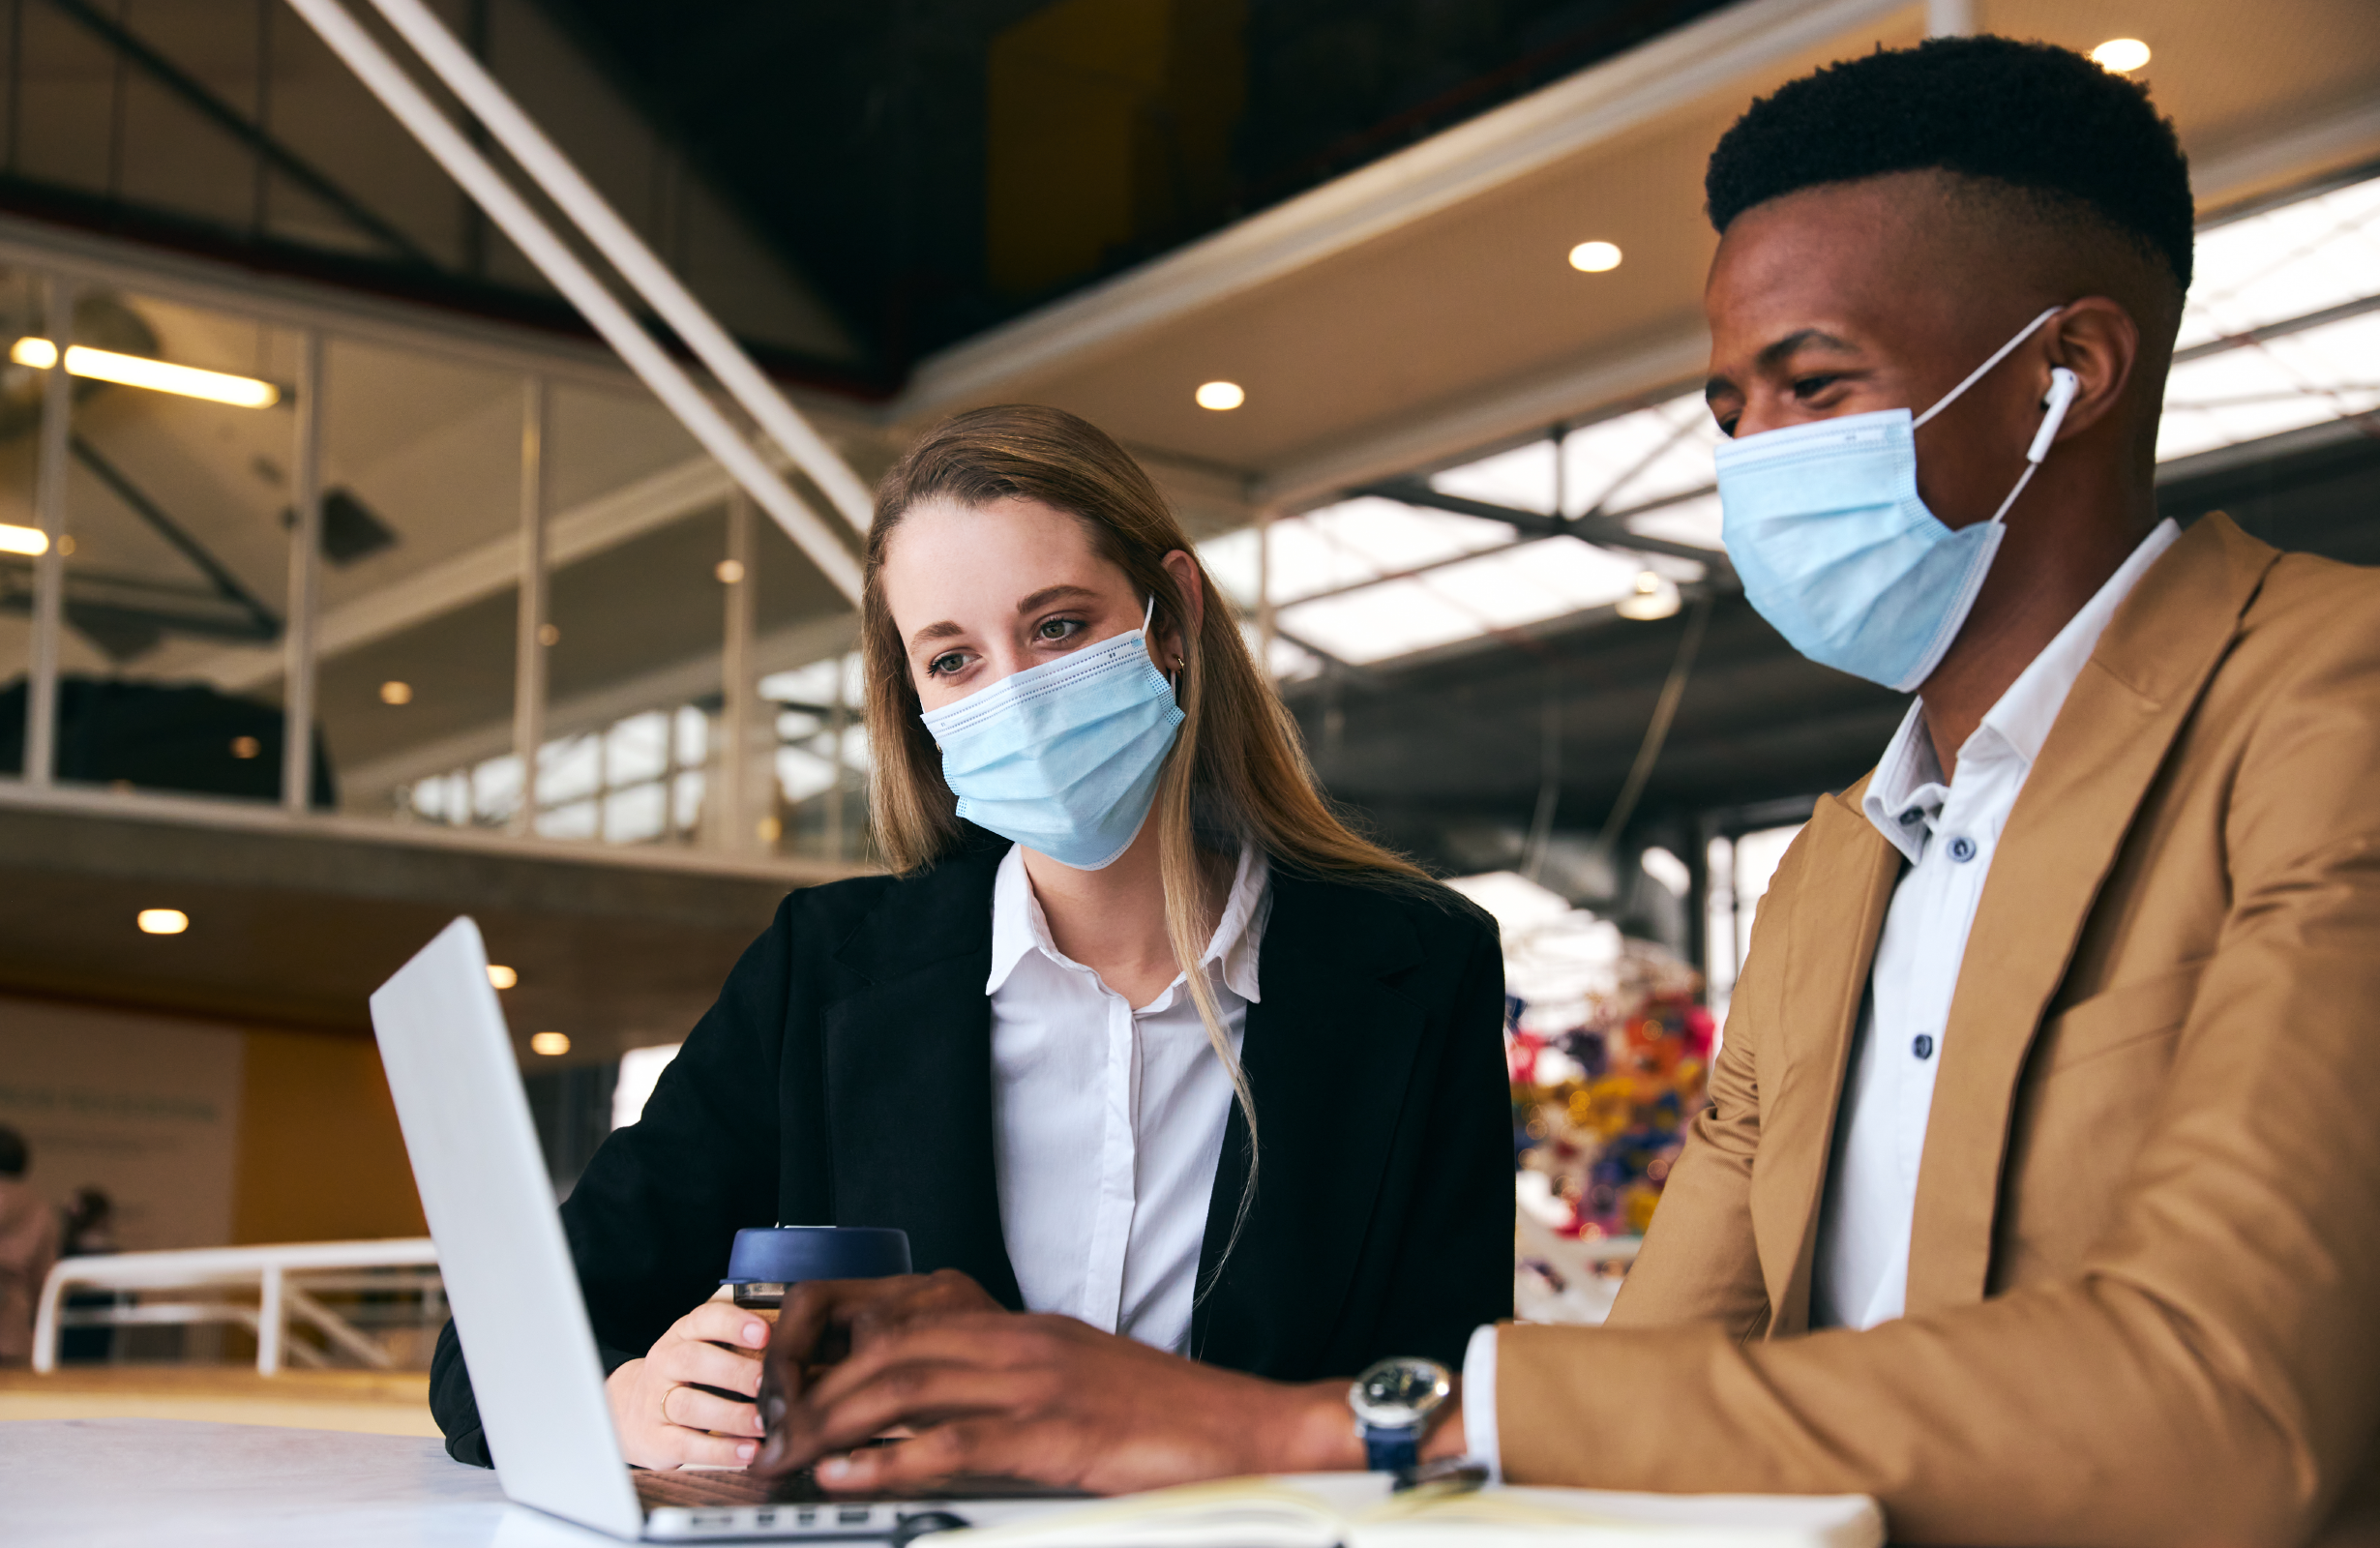 Suppliers wearing masks while working on computer